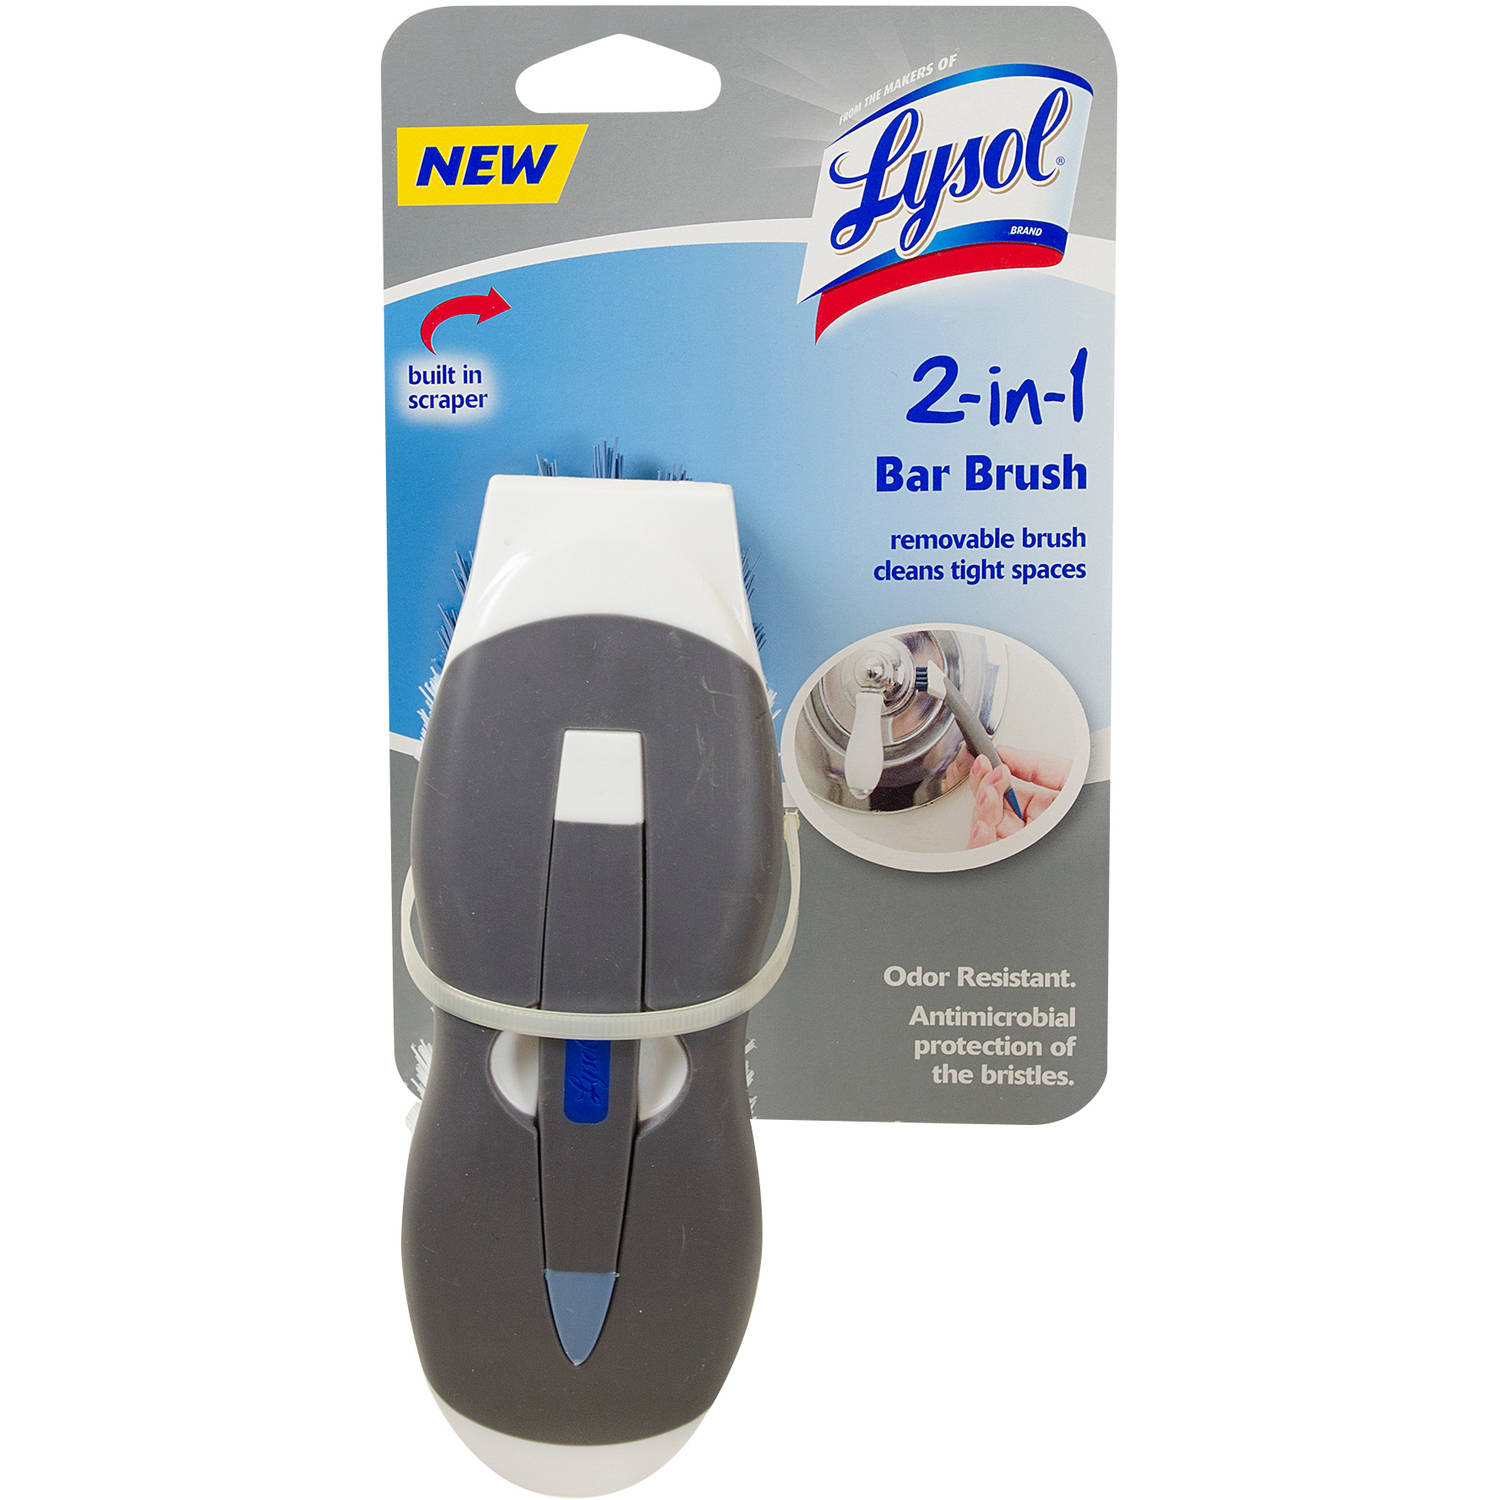 Lysol 2-in-1 Bar Brush - image 2 of 4